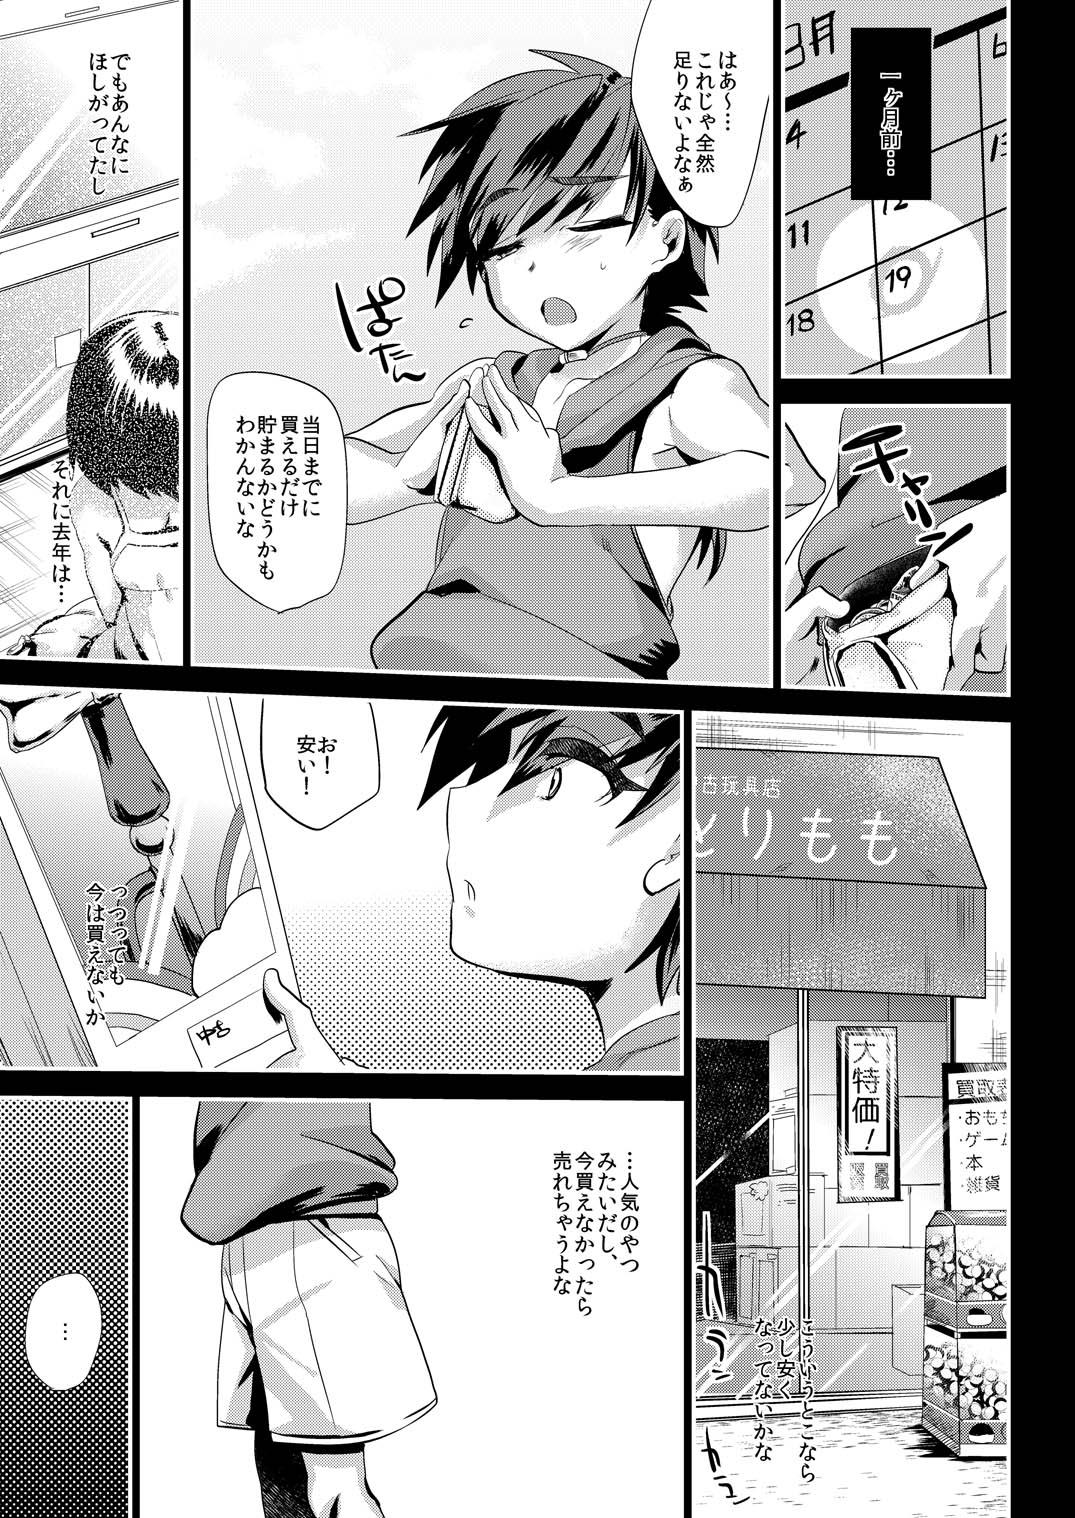 Best Blowjob Ever Arigatou Oniichan Rica - Page 8